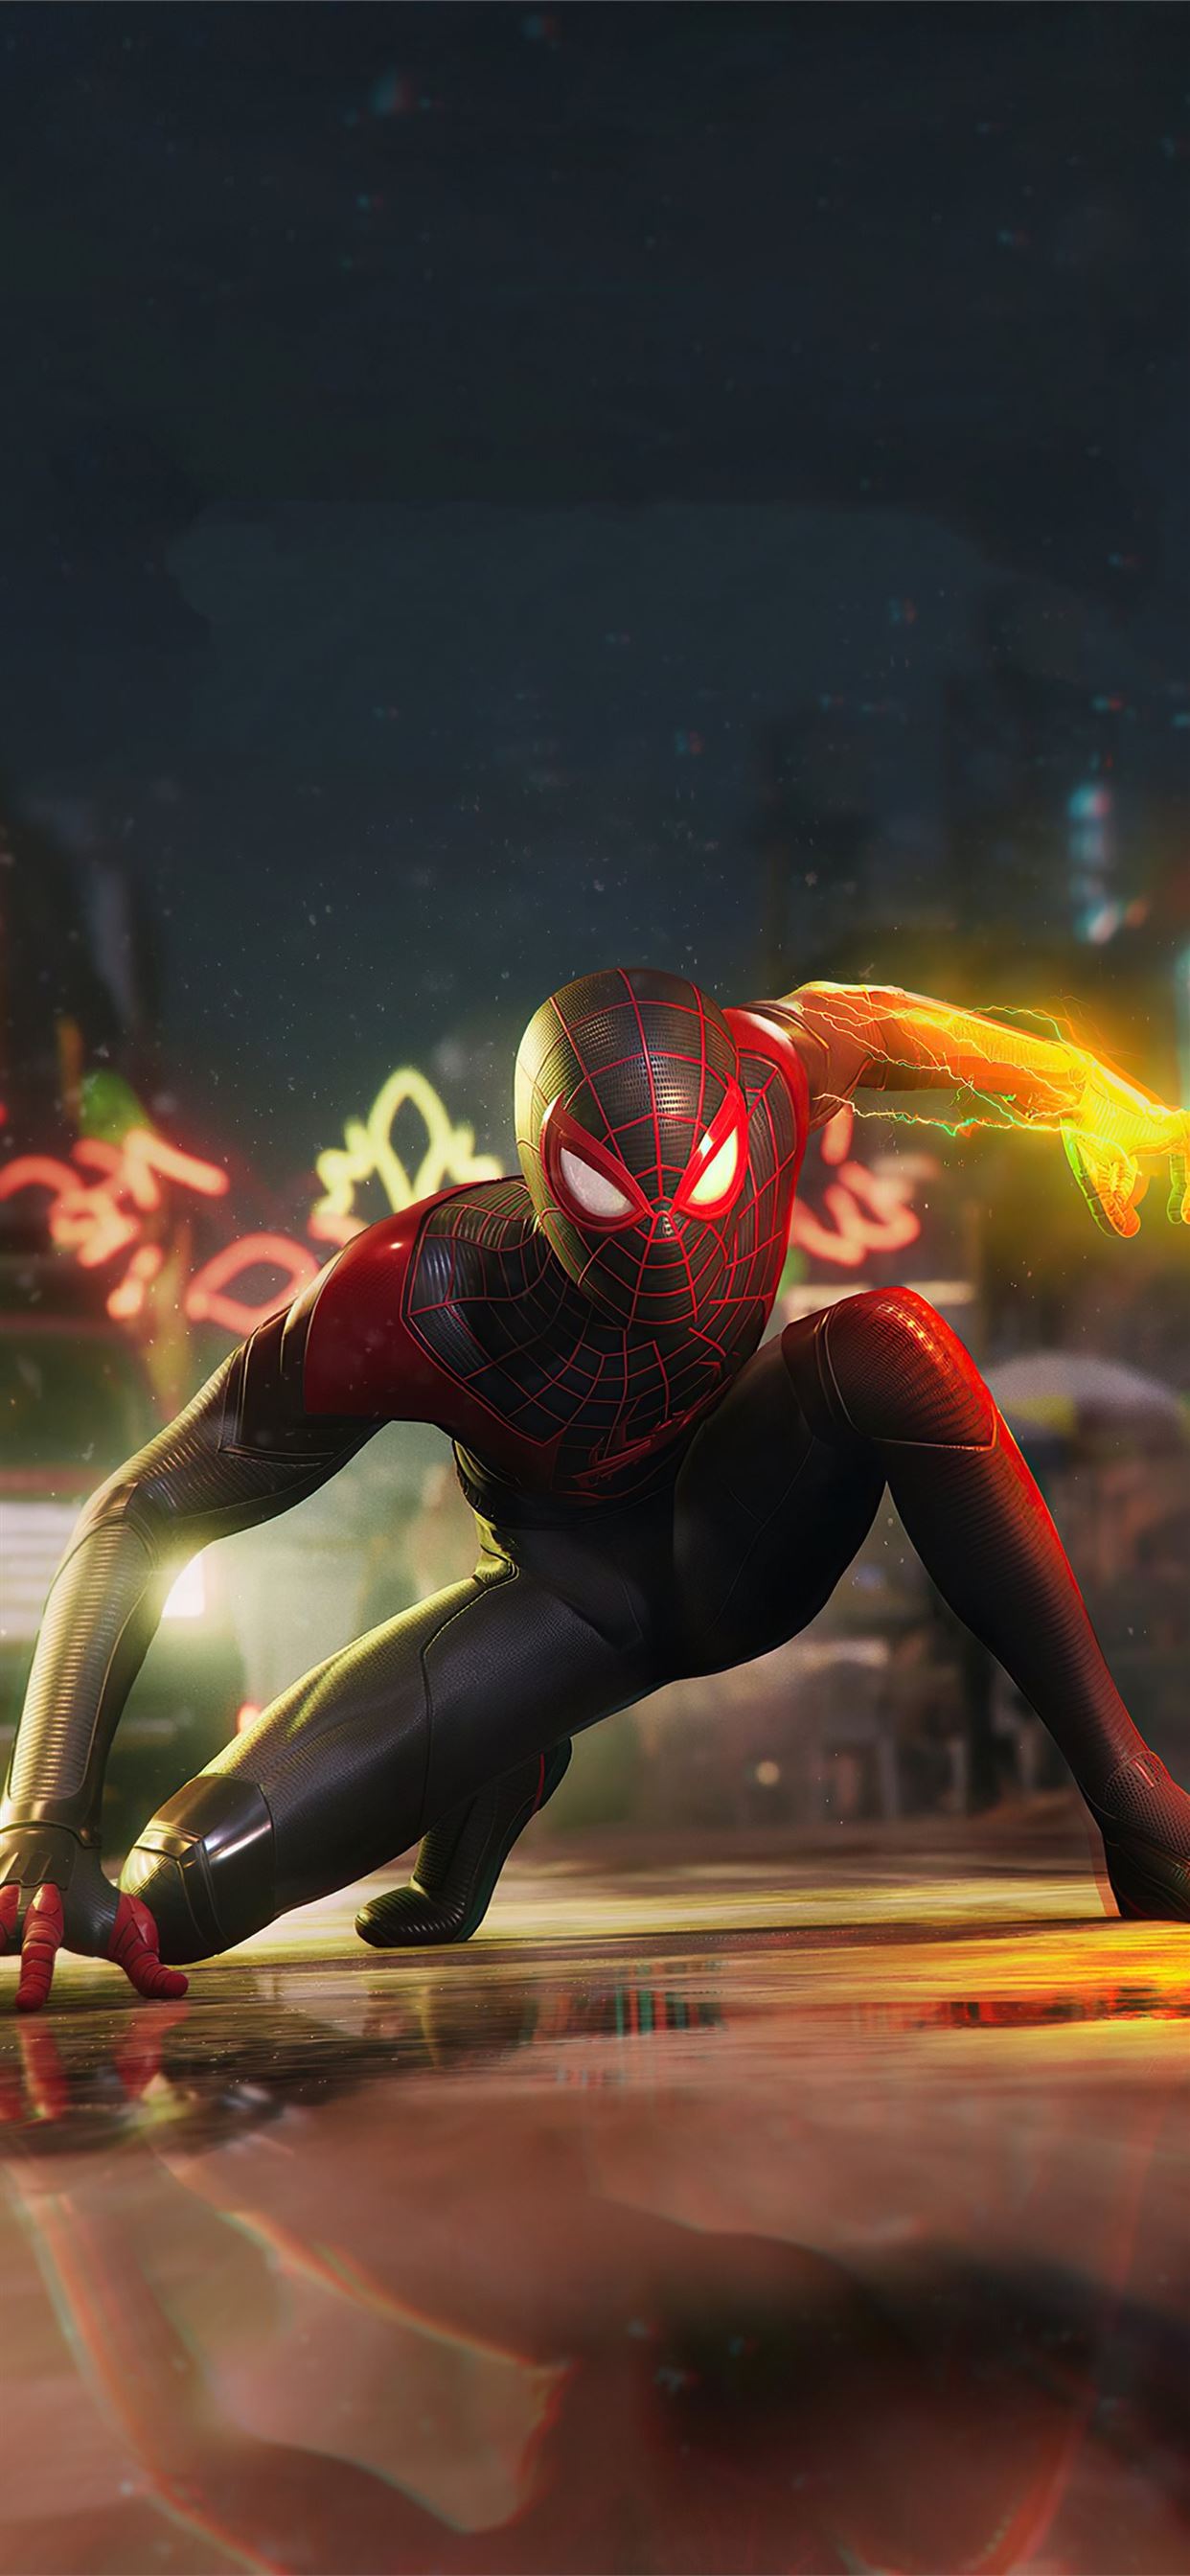 2020 Marvels Spider Man Miles Morales New 4k Iphone X Wallpapers Free